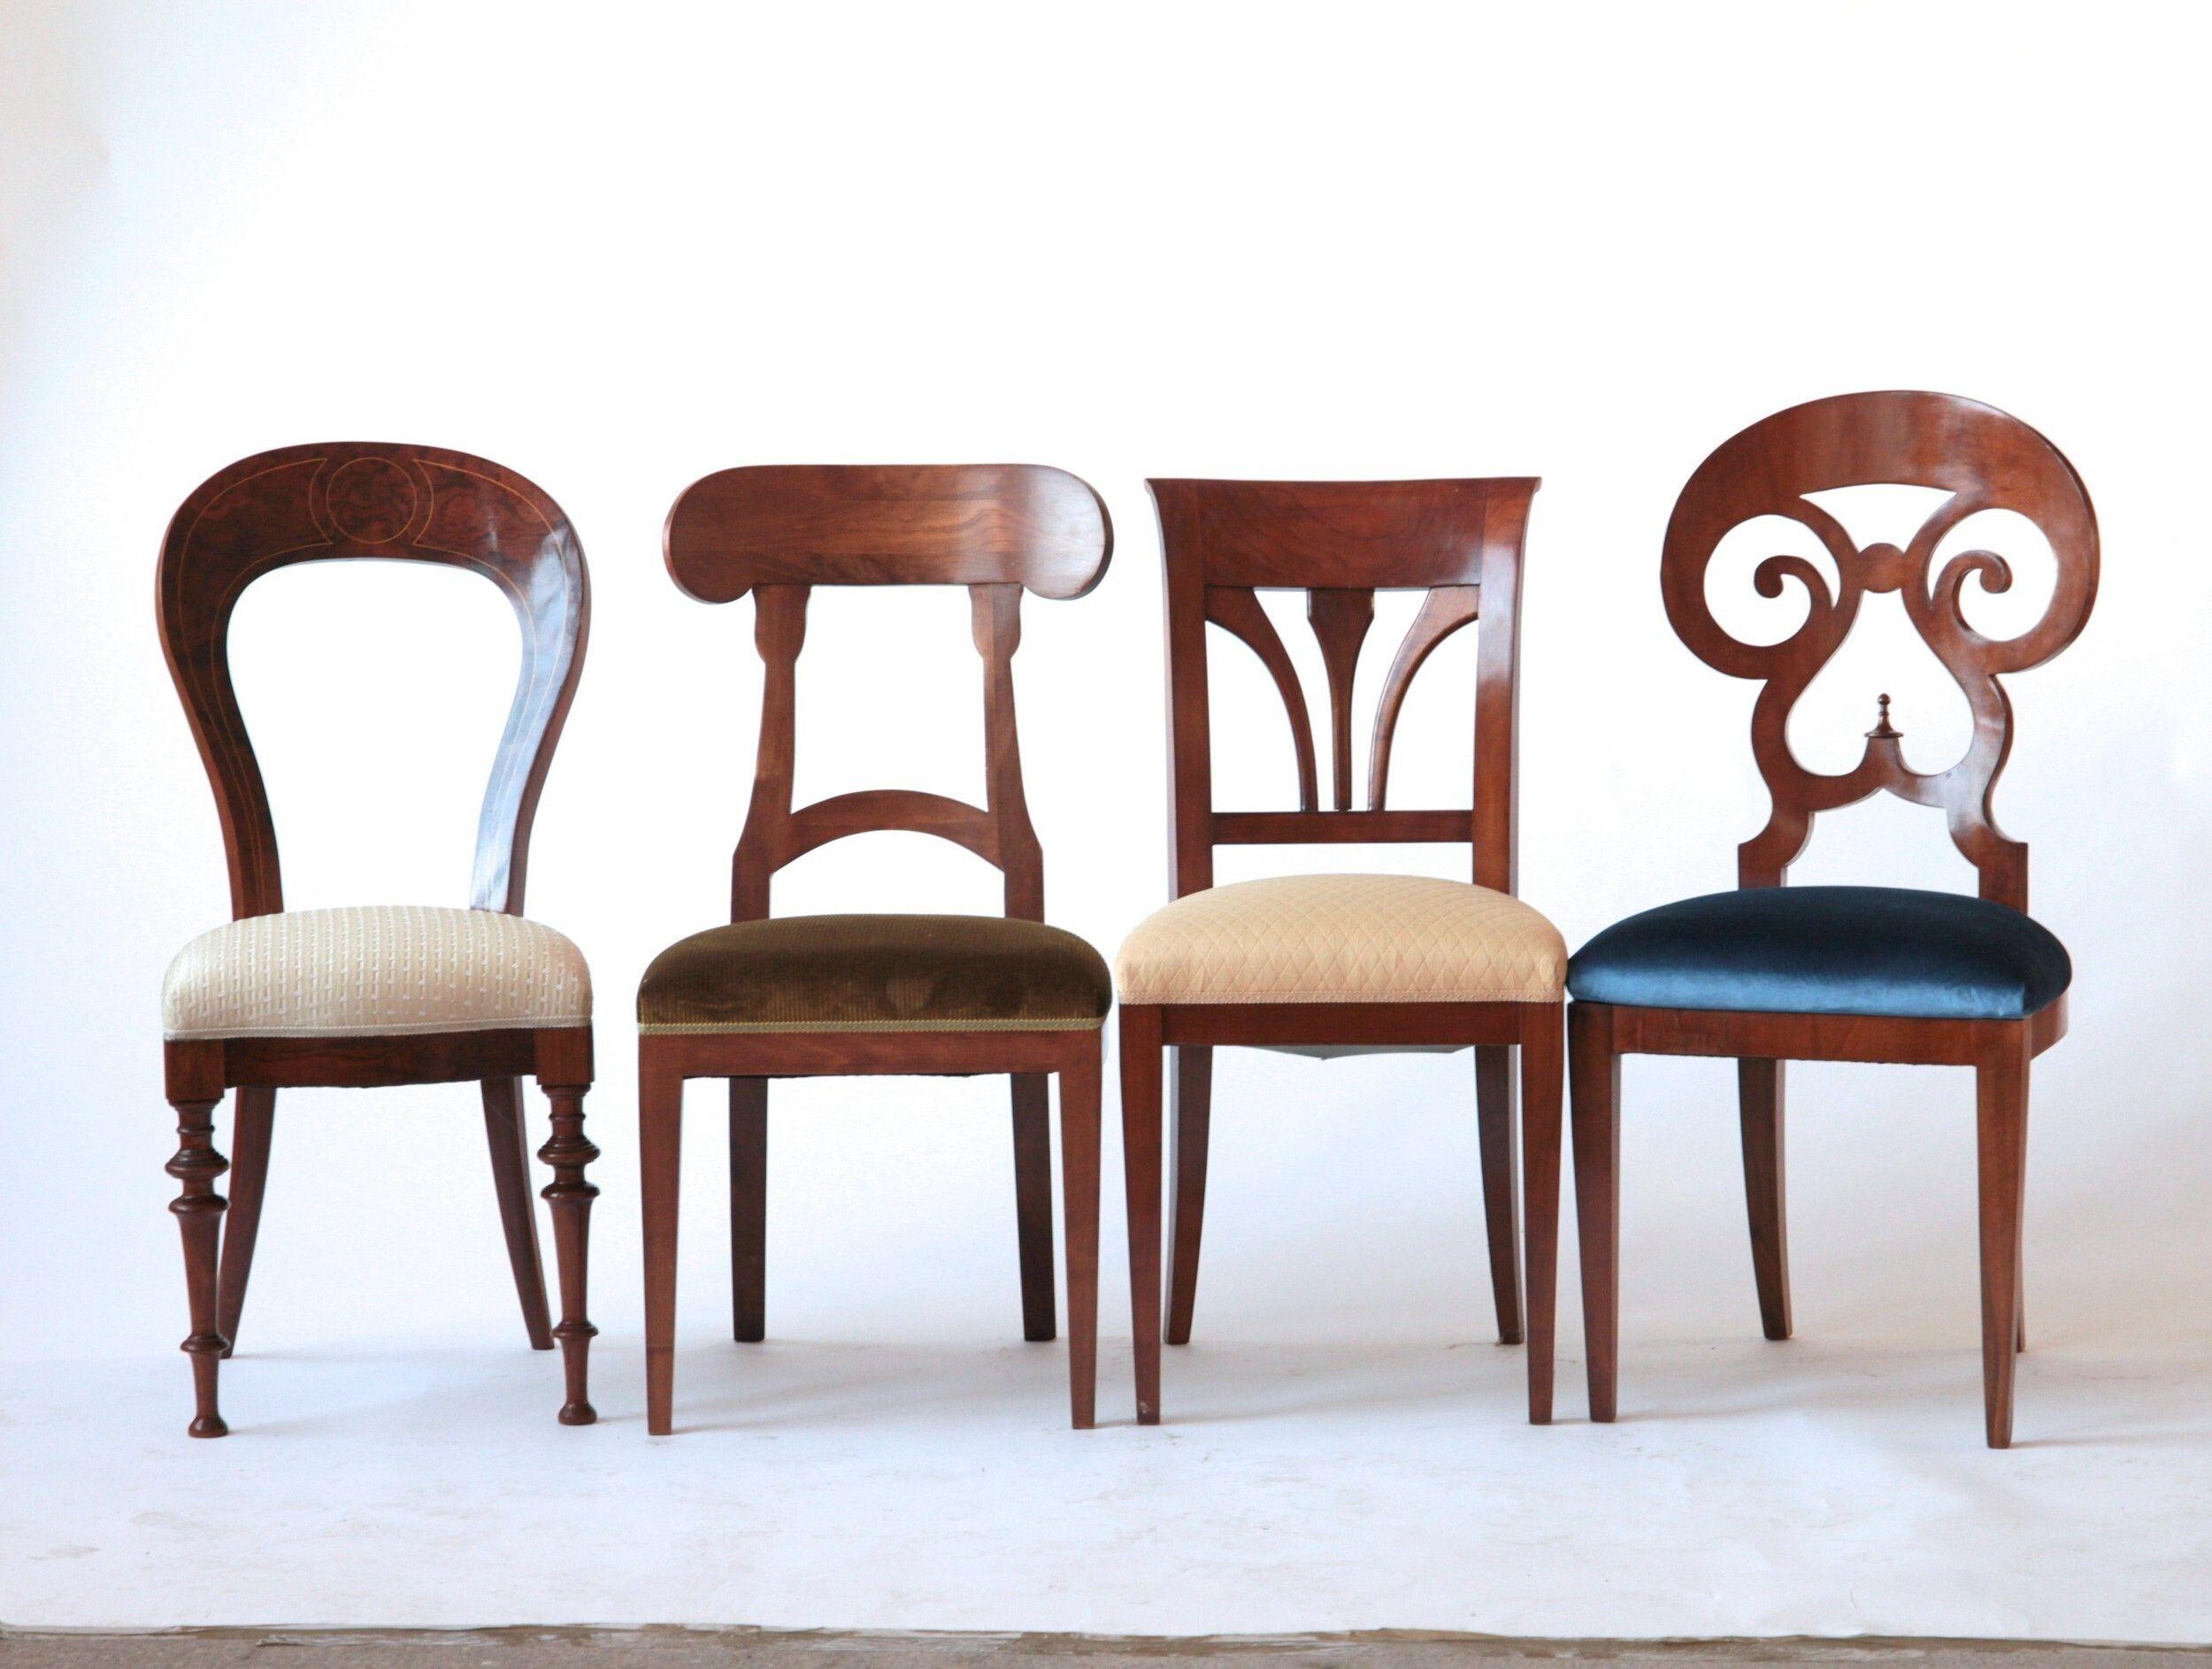 I'm proposing here a new Biedermeier set. Made of eight different style of chairs.

After the success of the first sets I was able to make two more interesting sets from the collection that is probably the widest mid-19th century chair